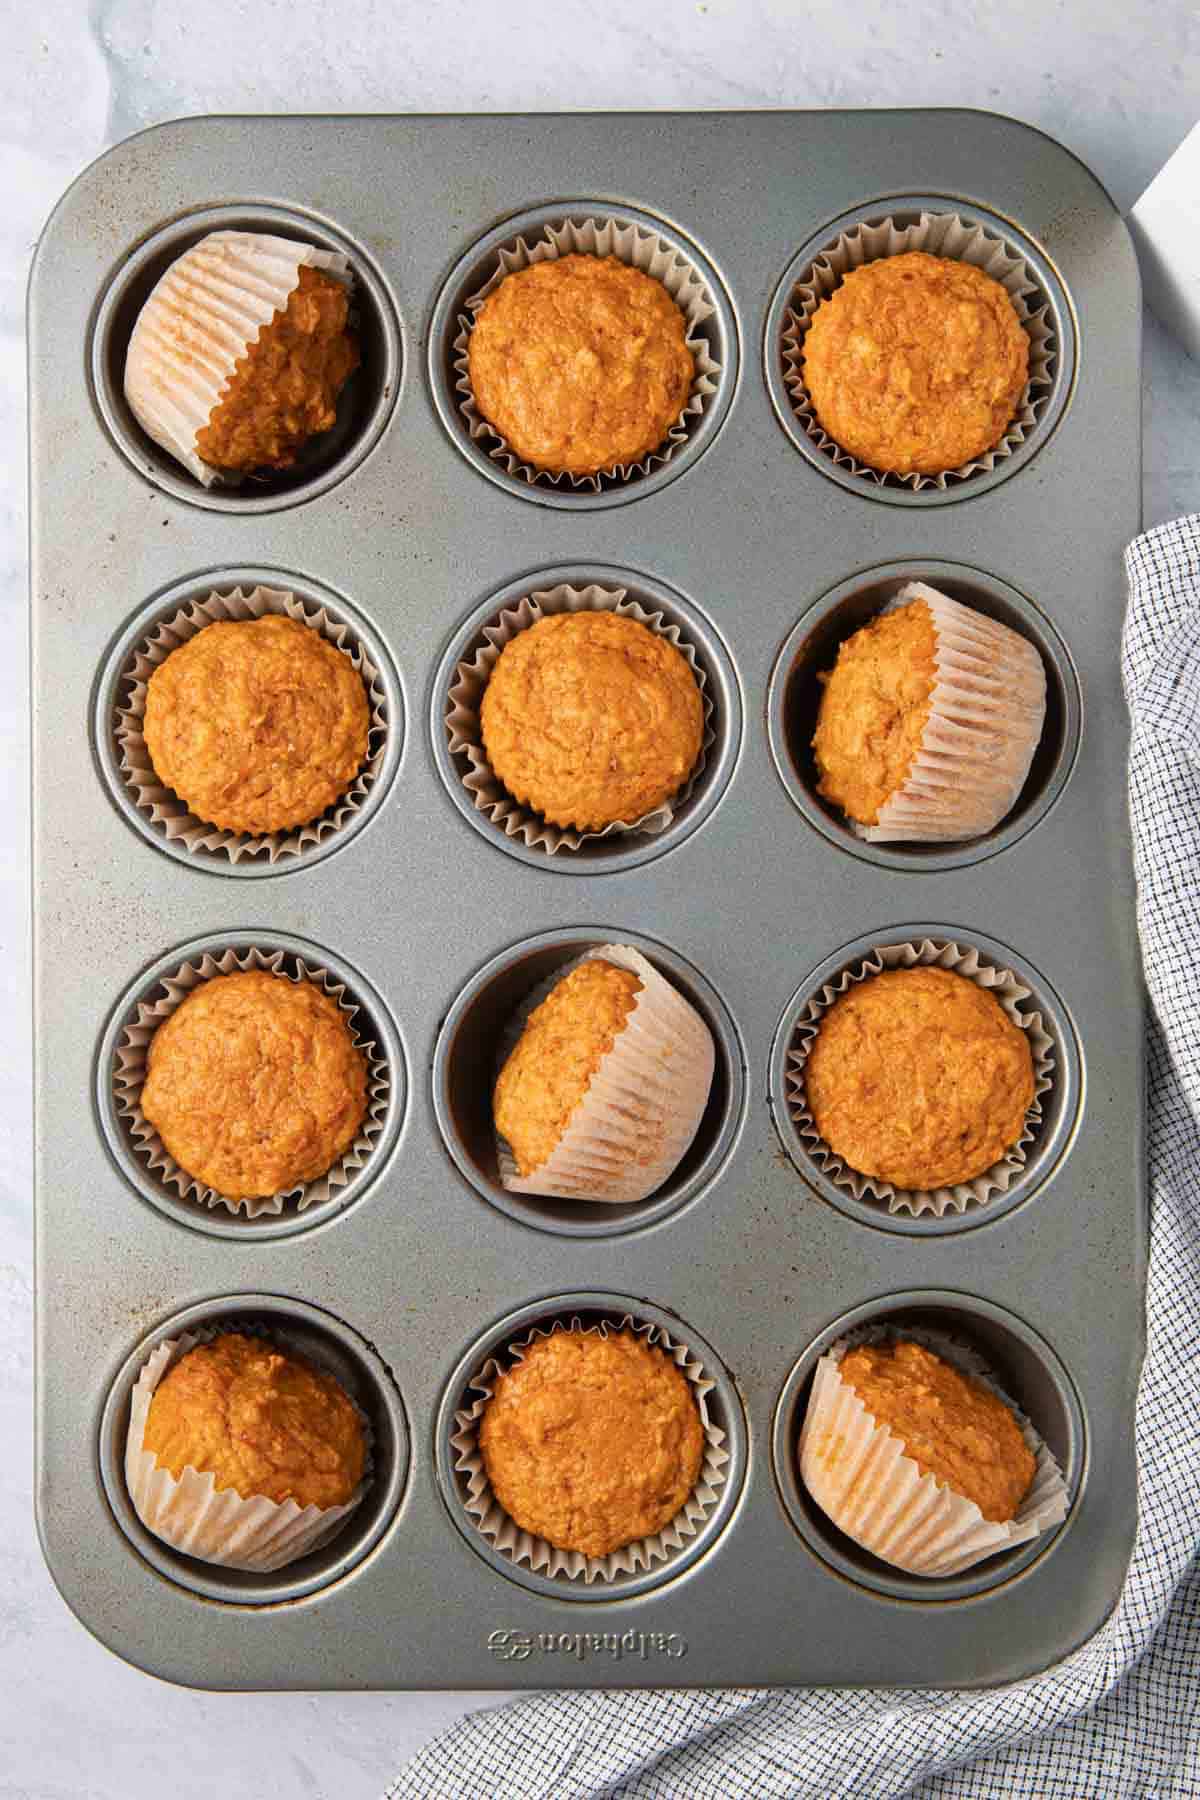 Close up shot of the sweet potato muffins with almond butter on the side